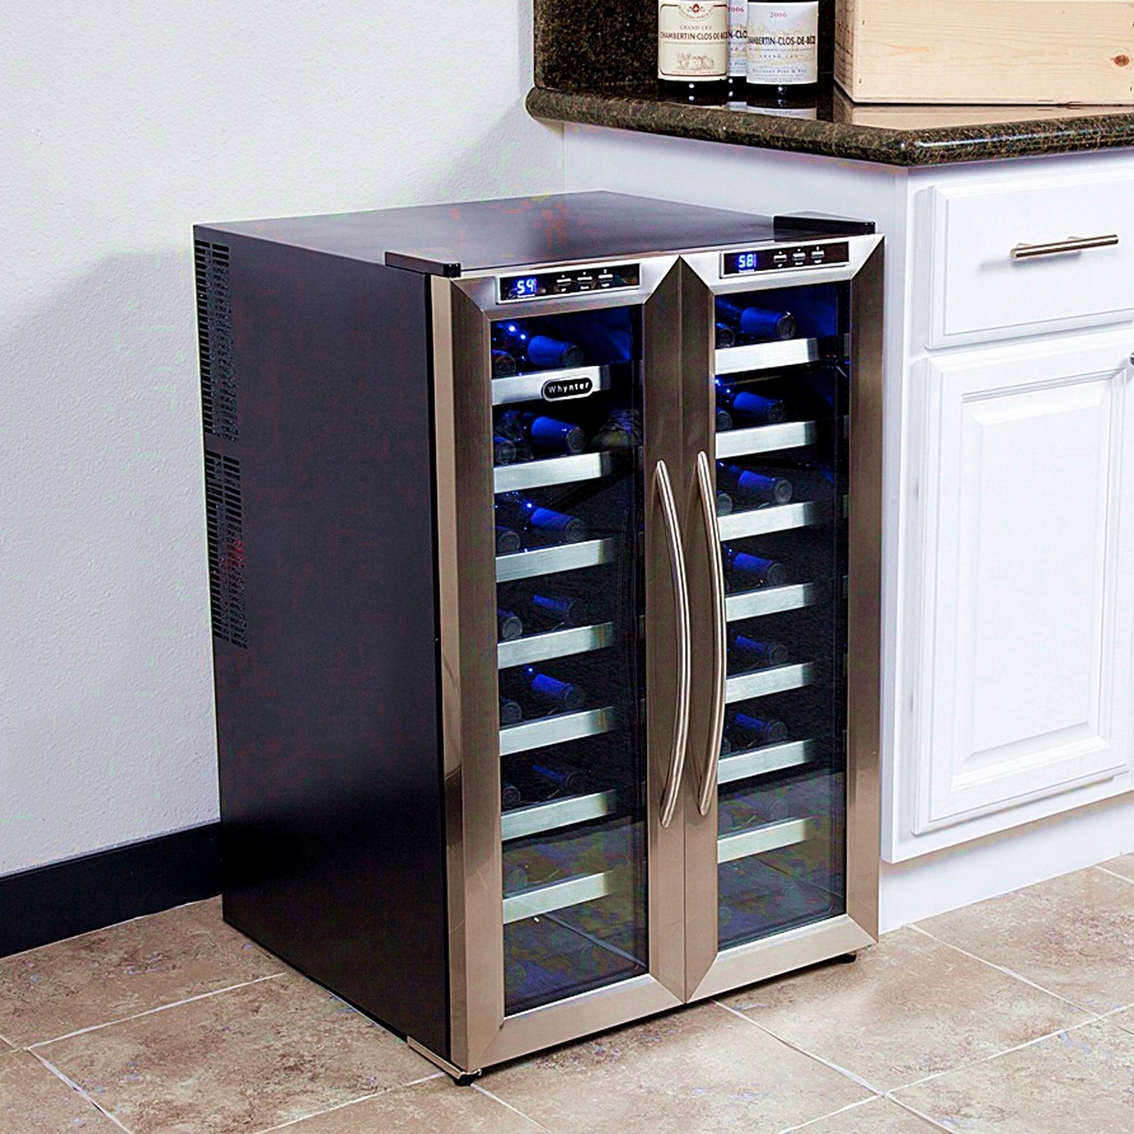 Whynter 32 Bottle Dual Temperature Zone Wine Cooler - Image 4 of 4